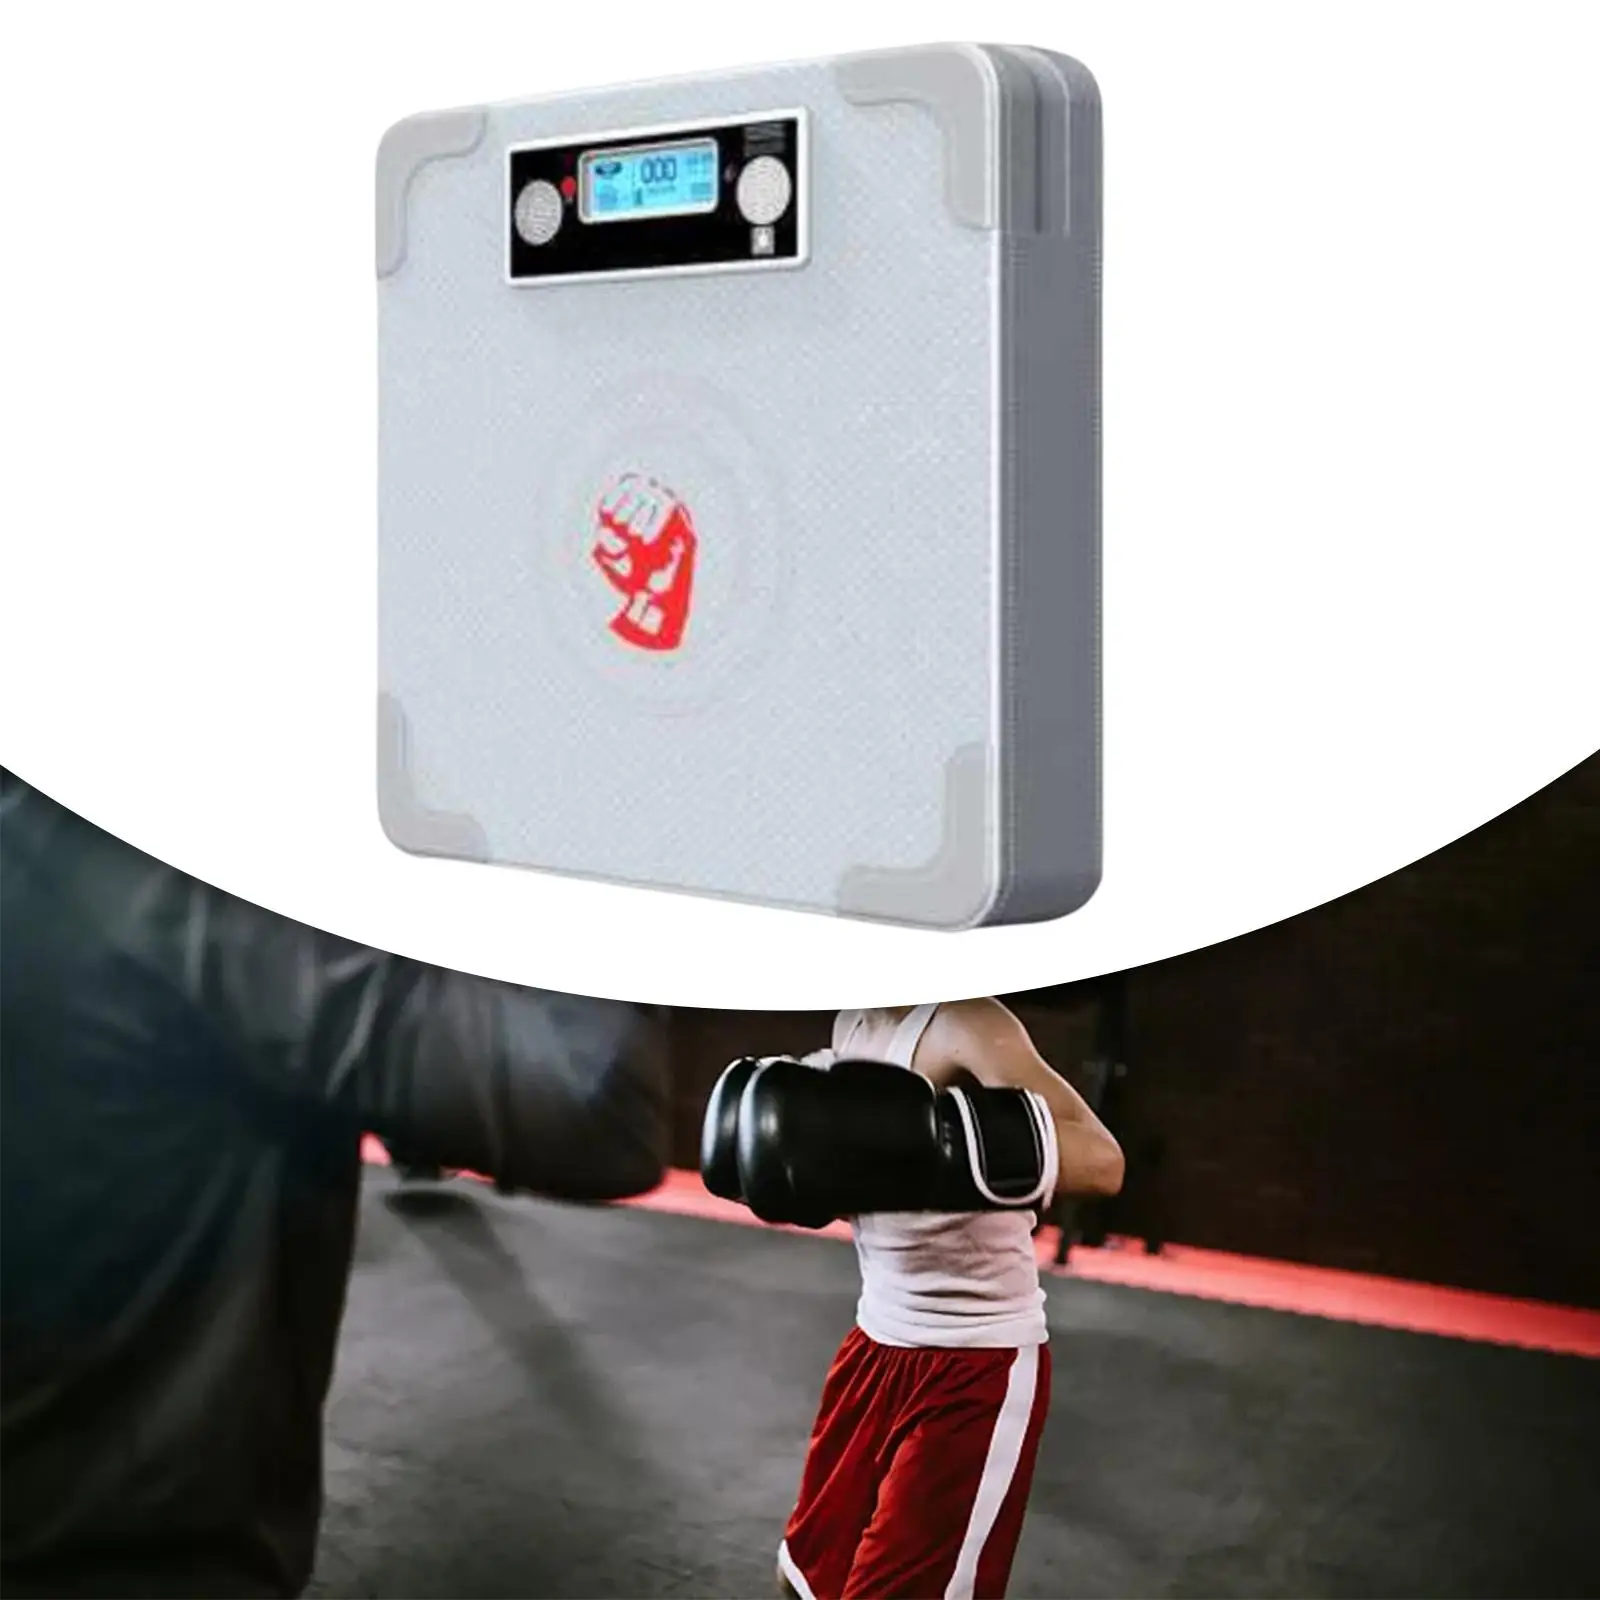 

Boxing Training Sandbag Boxing Machine Strength Tester Vent Target Electronic Wall Target Punching Bag for Kids Fitness Home Gym